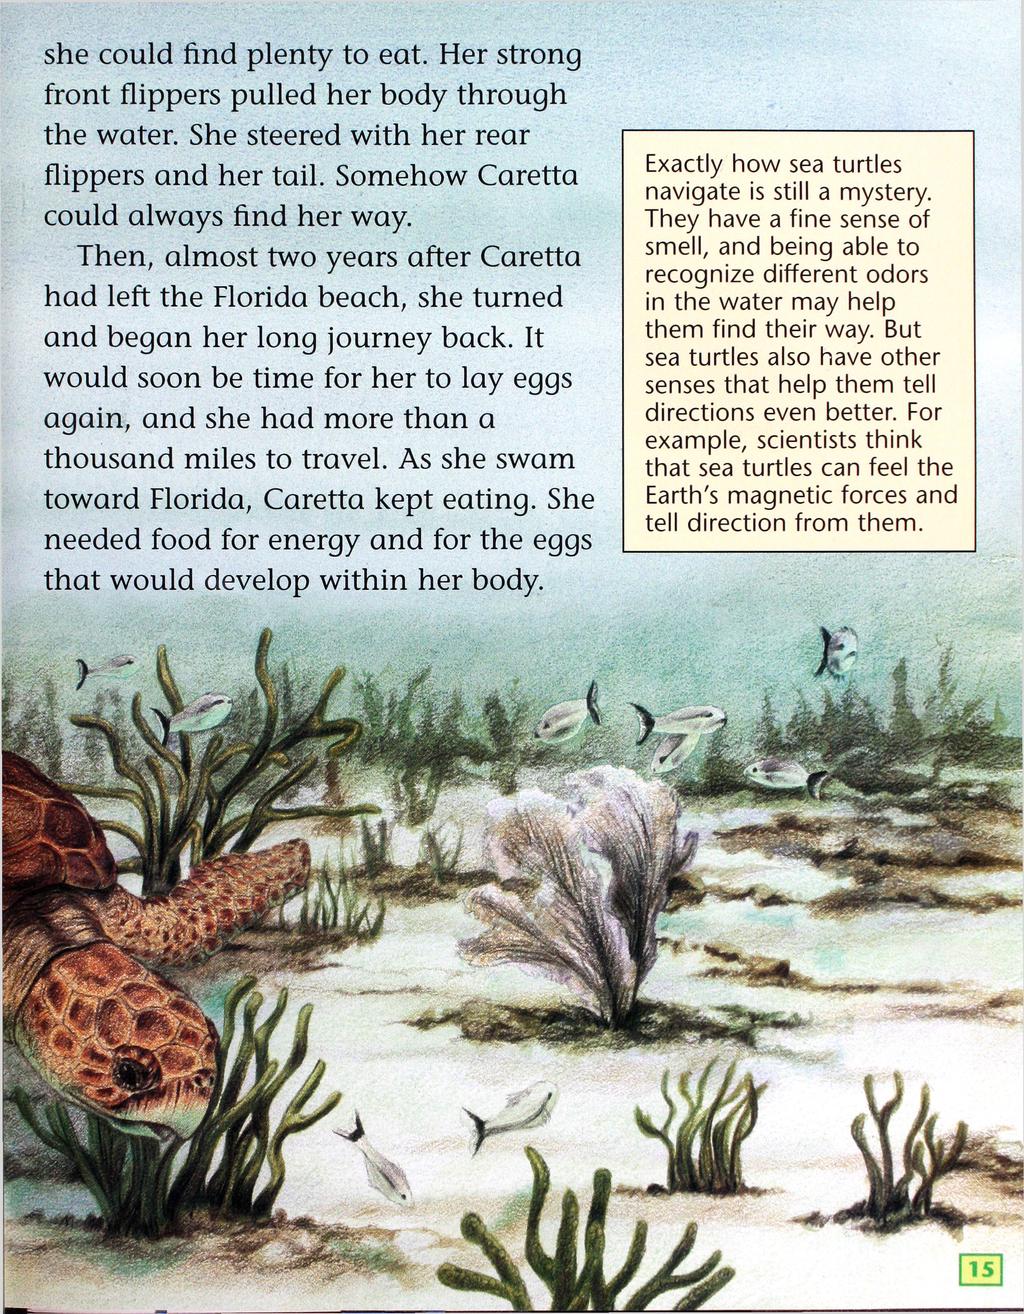 she could find plenty to eat. Her strong front flippers pulled her body through the water. She steered with her rear flippers and her tail. Somehow Caretta could always find her way.